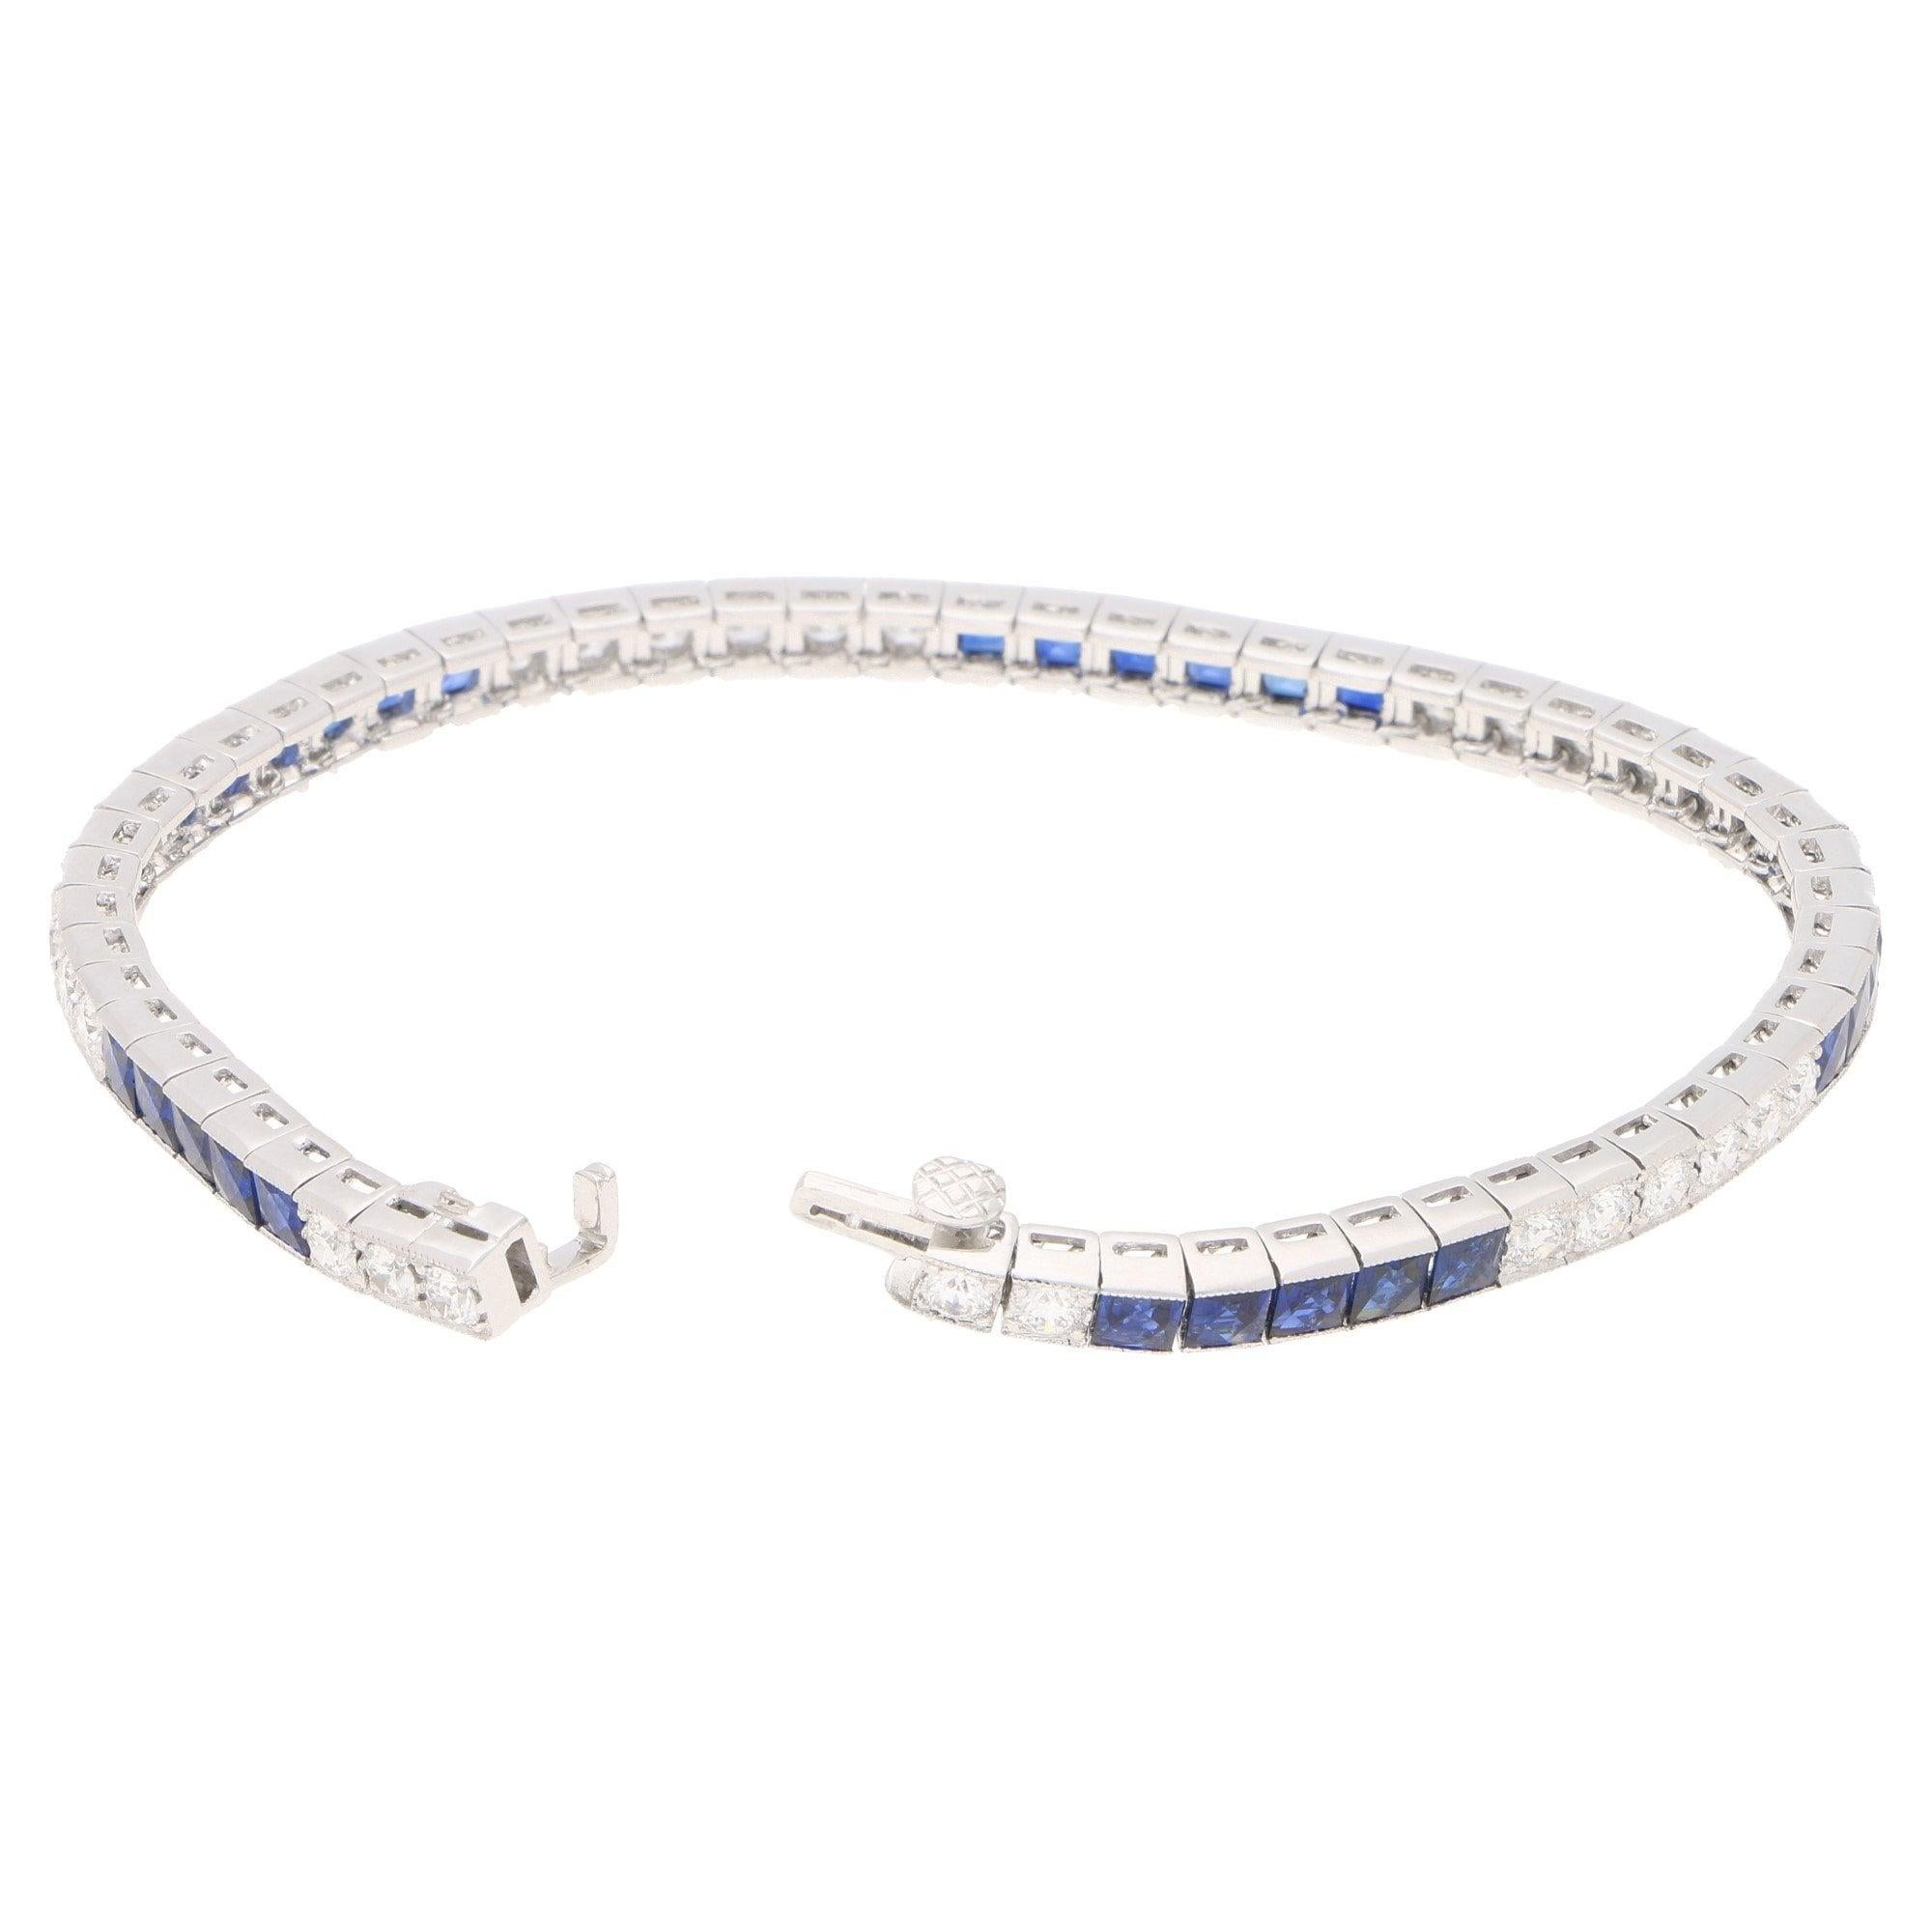 French Cut Art Deco Inspired Sapphire and Diamond Line / Tennis Bracelet in Platinum